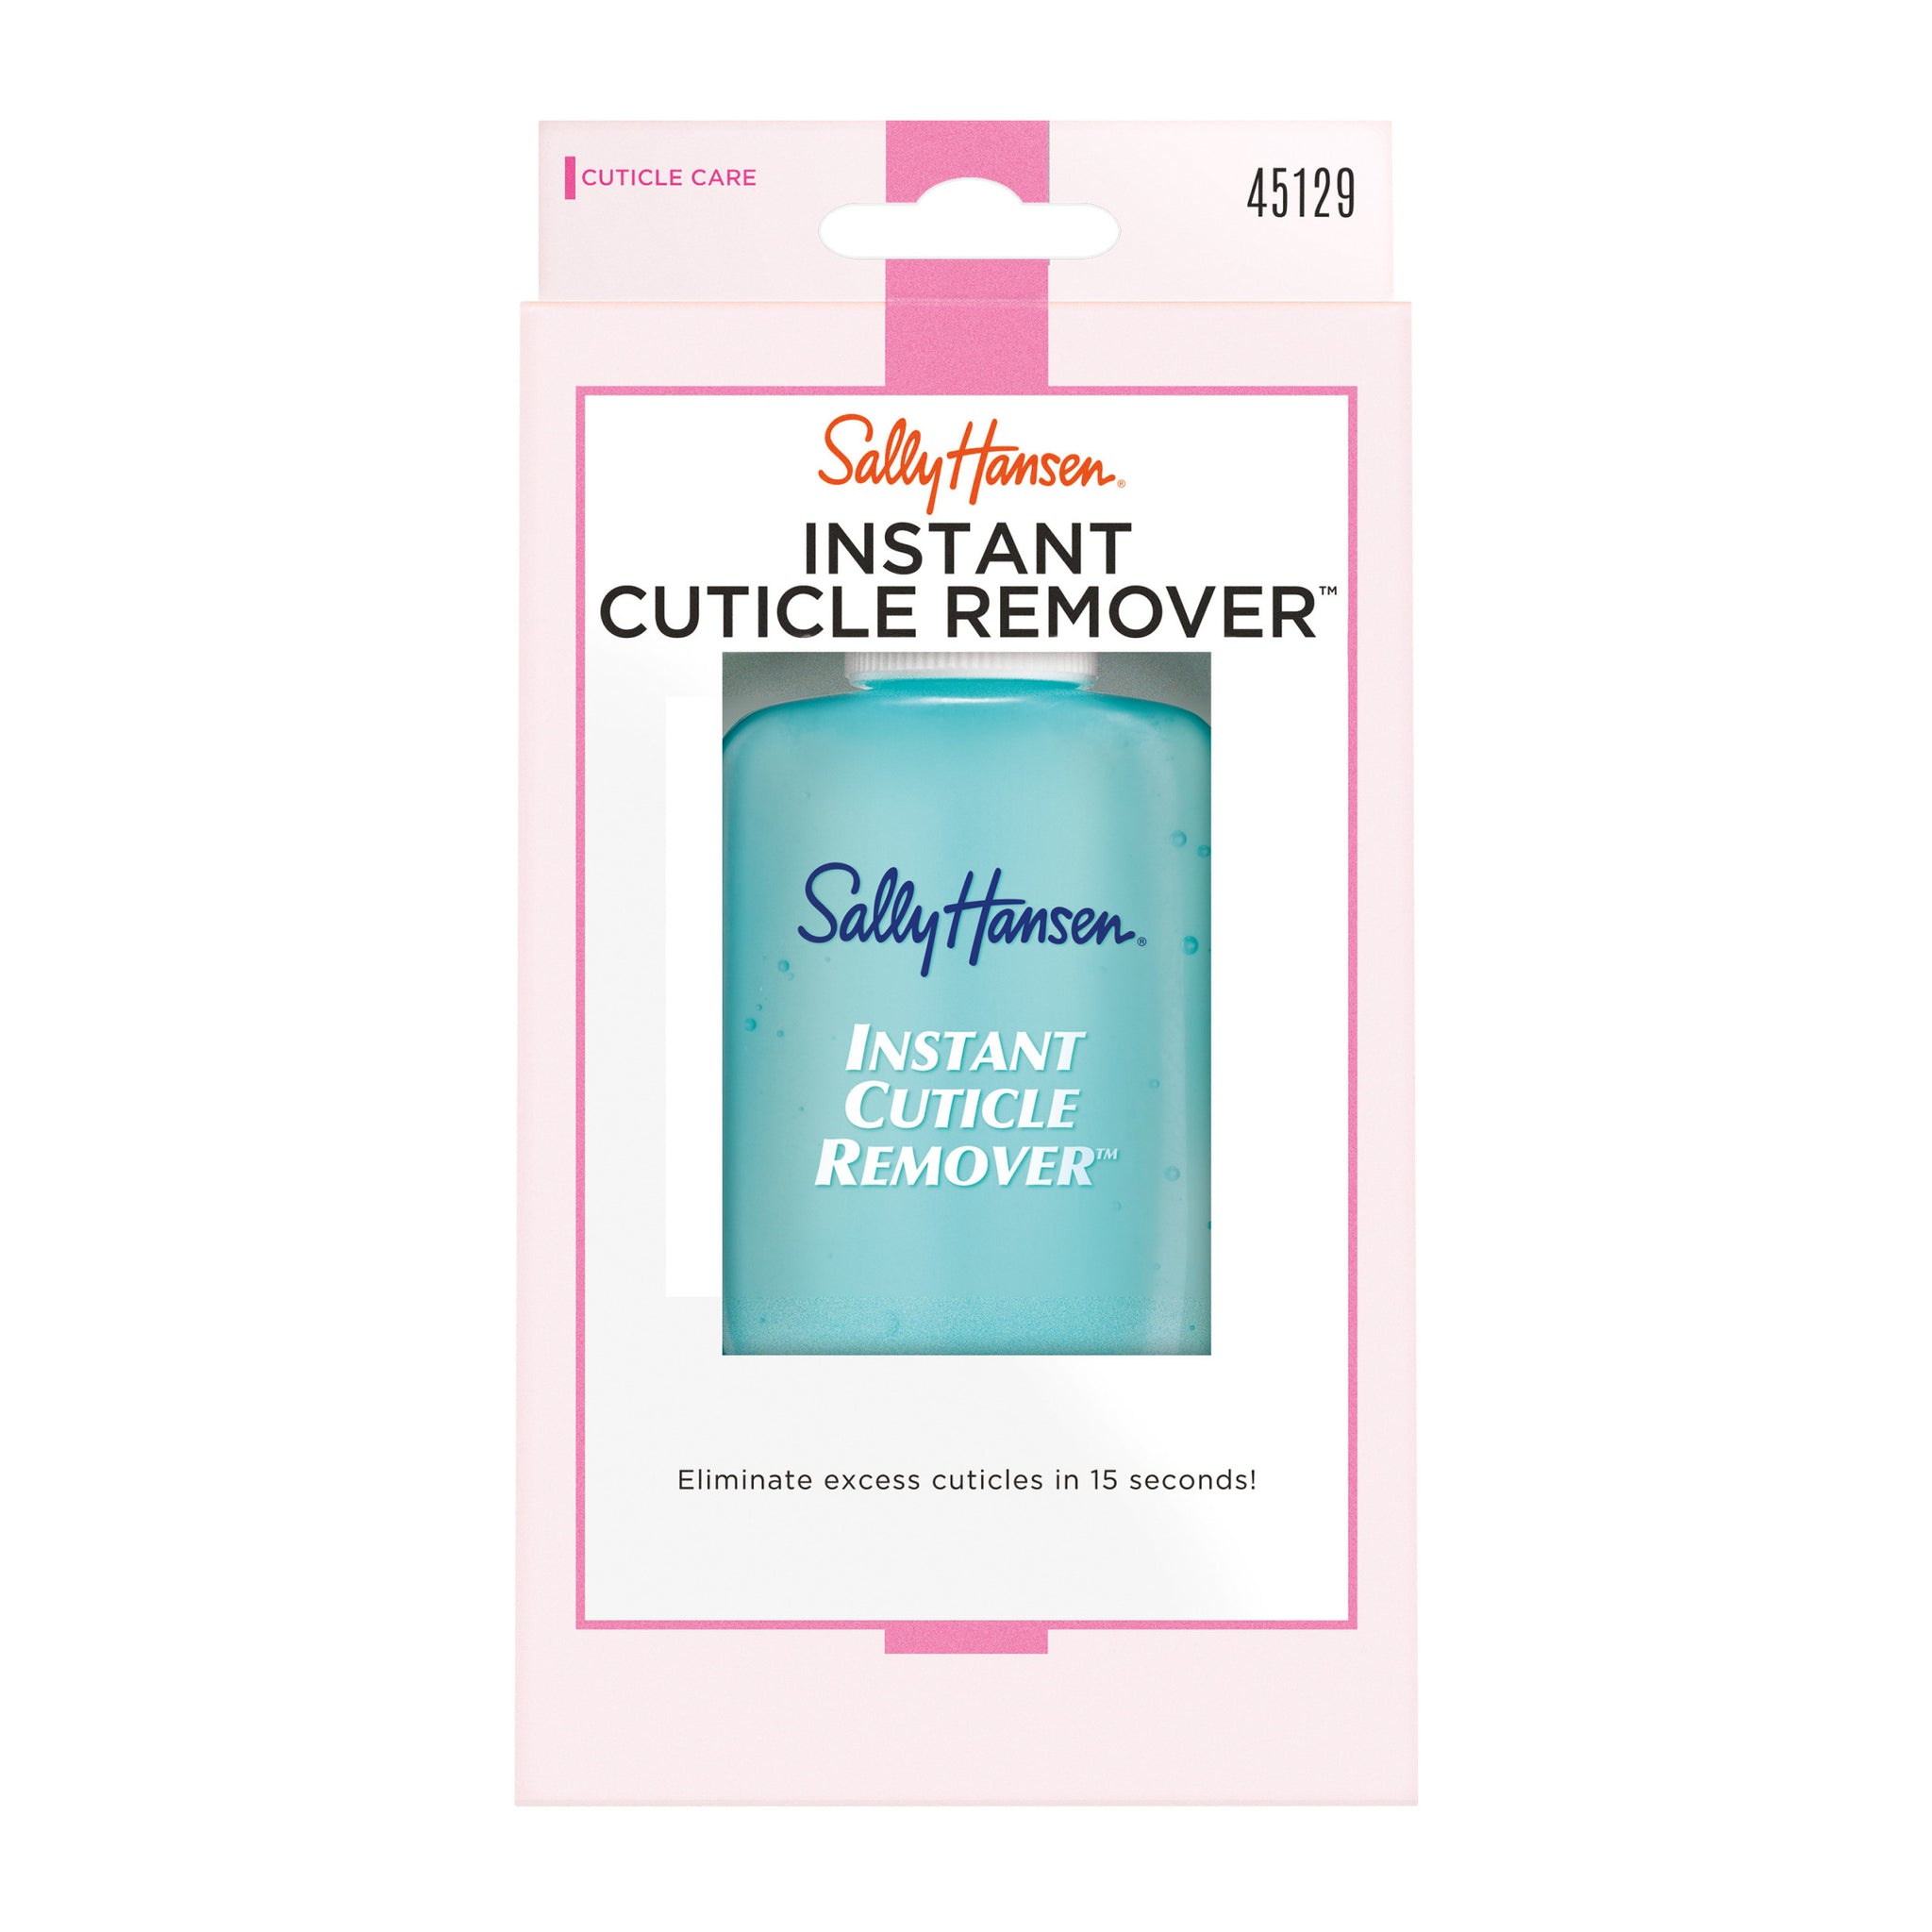 Instant Cuticle Remover